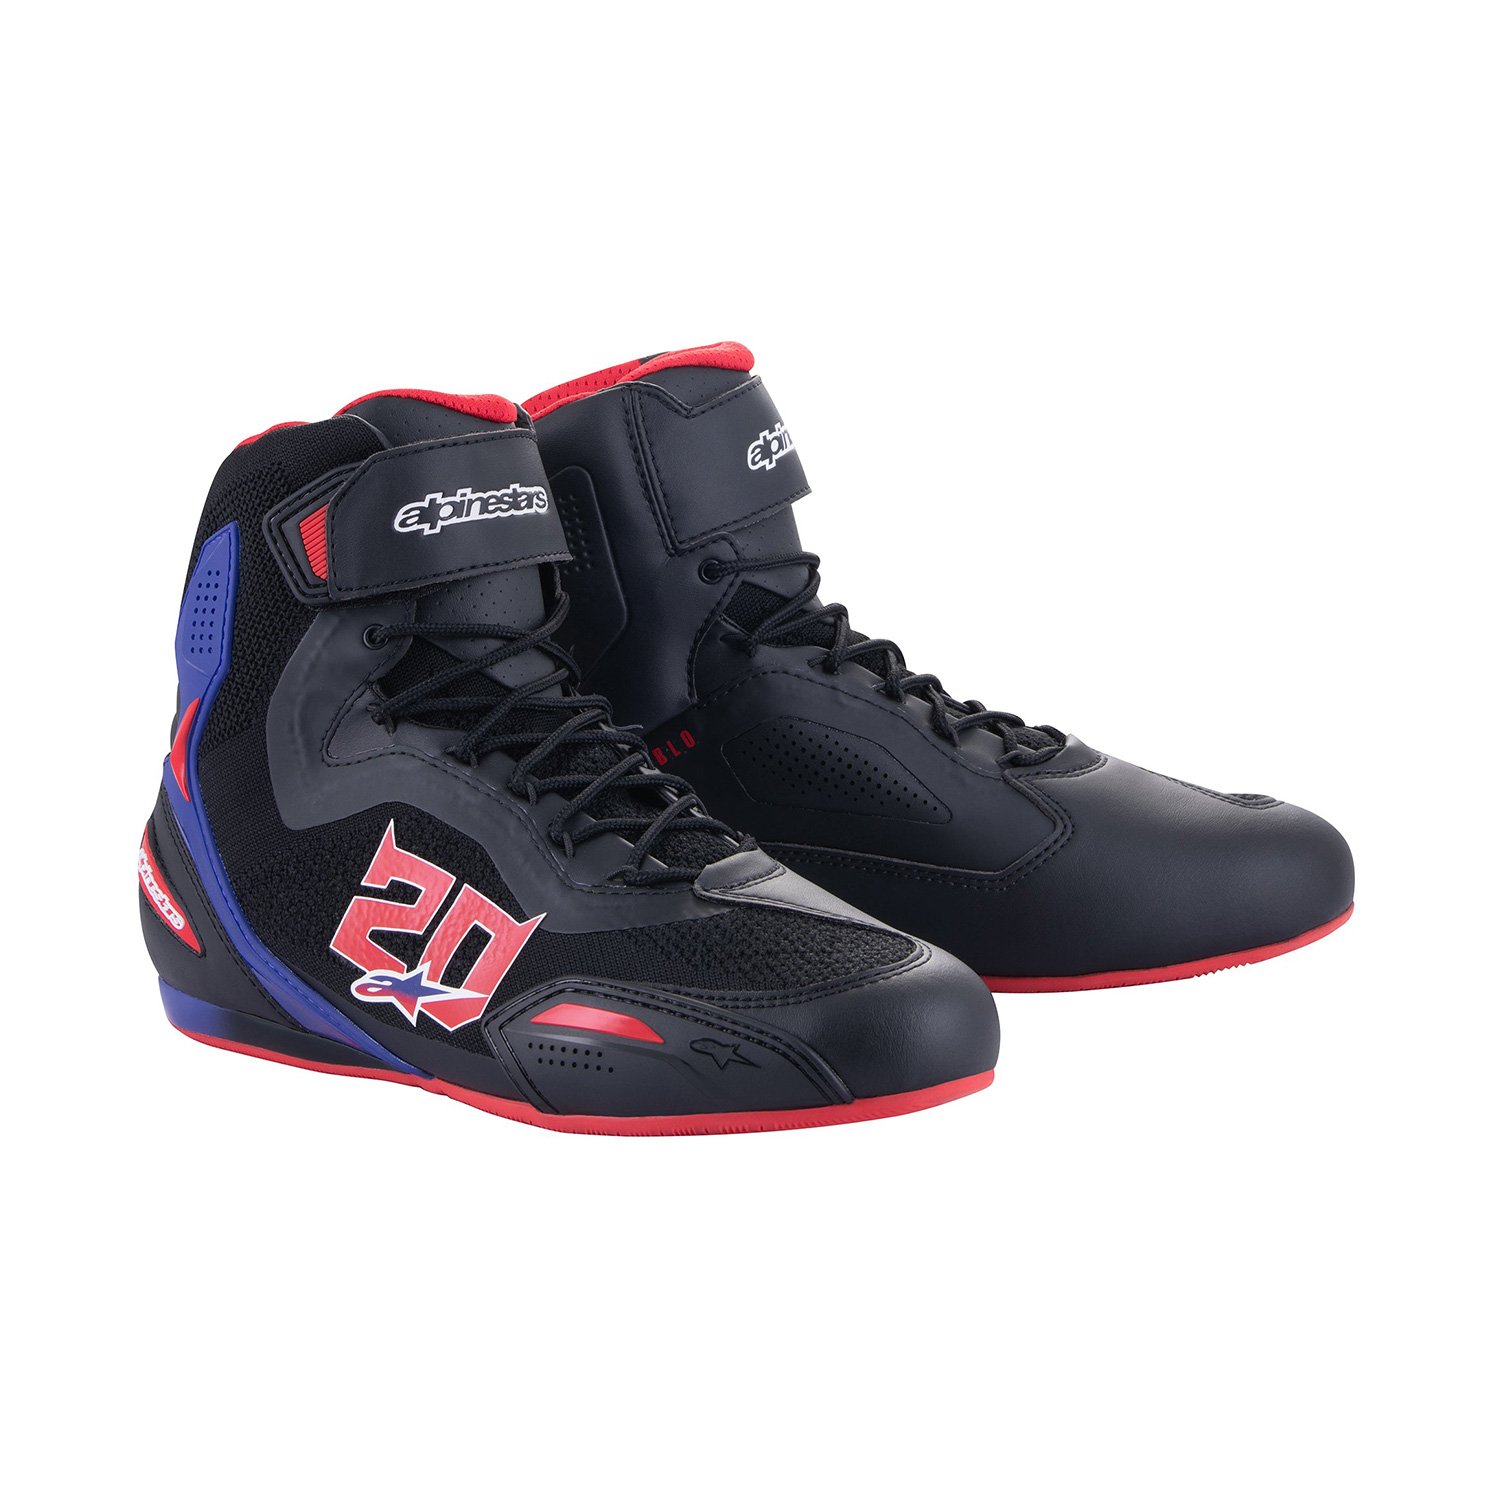 Image of EU Alpinestars FQ20 Faster-3 Rideknit Noir Bright Rouge Bleu Chaussures Taille US 10